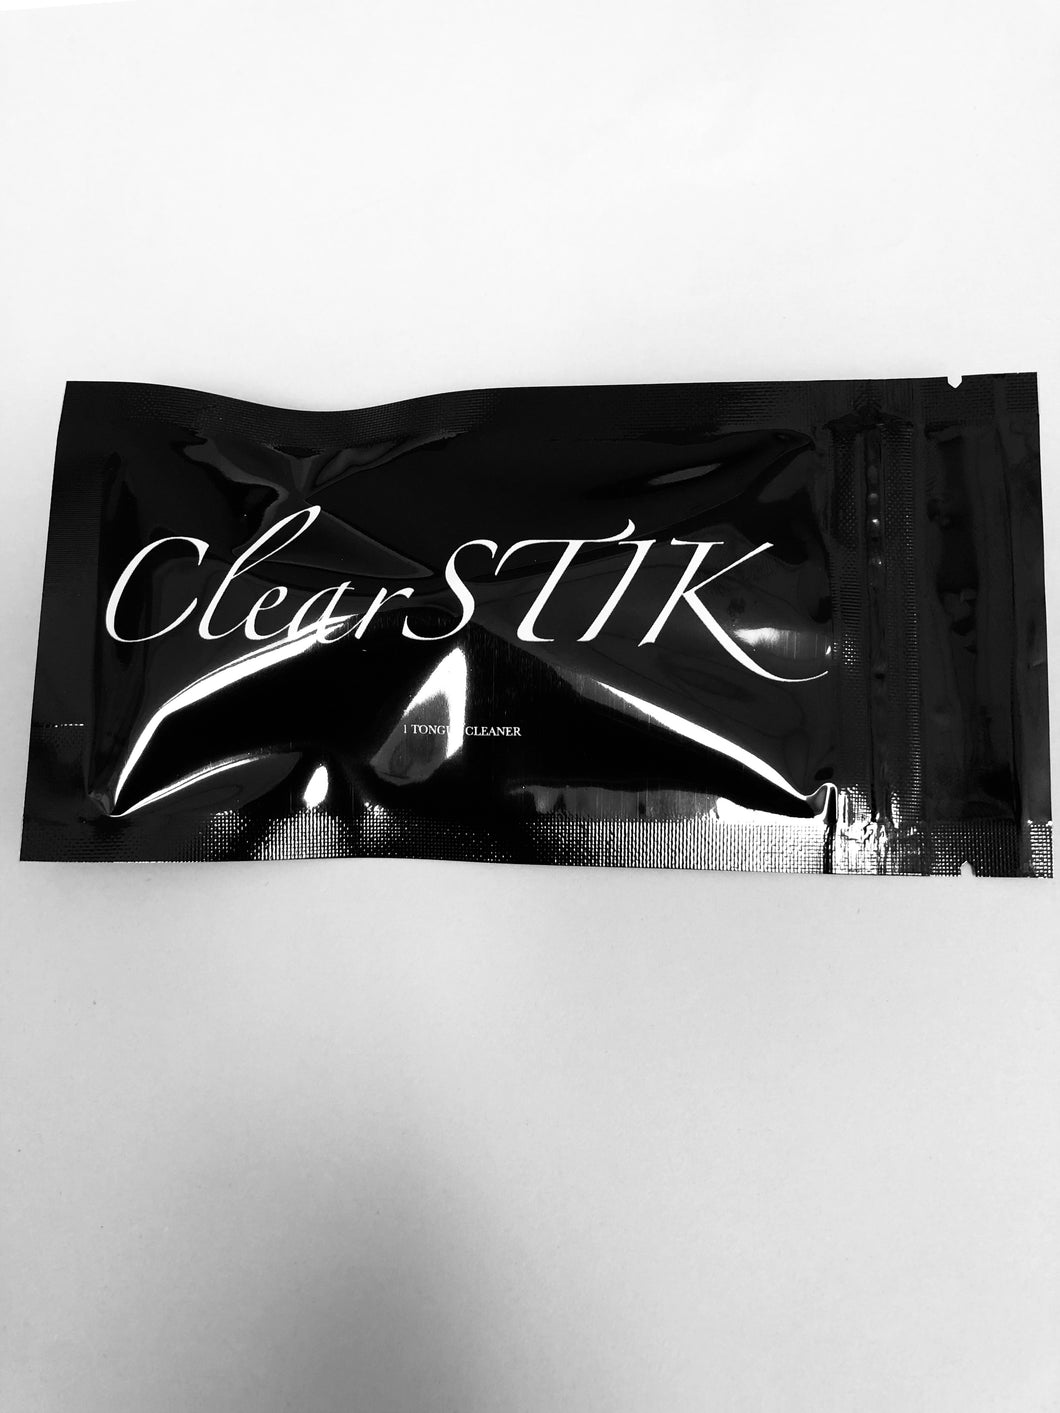 ClearSTIK (1  tongue cleaner)